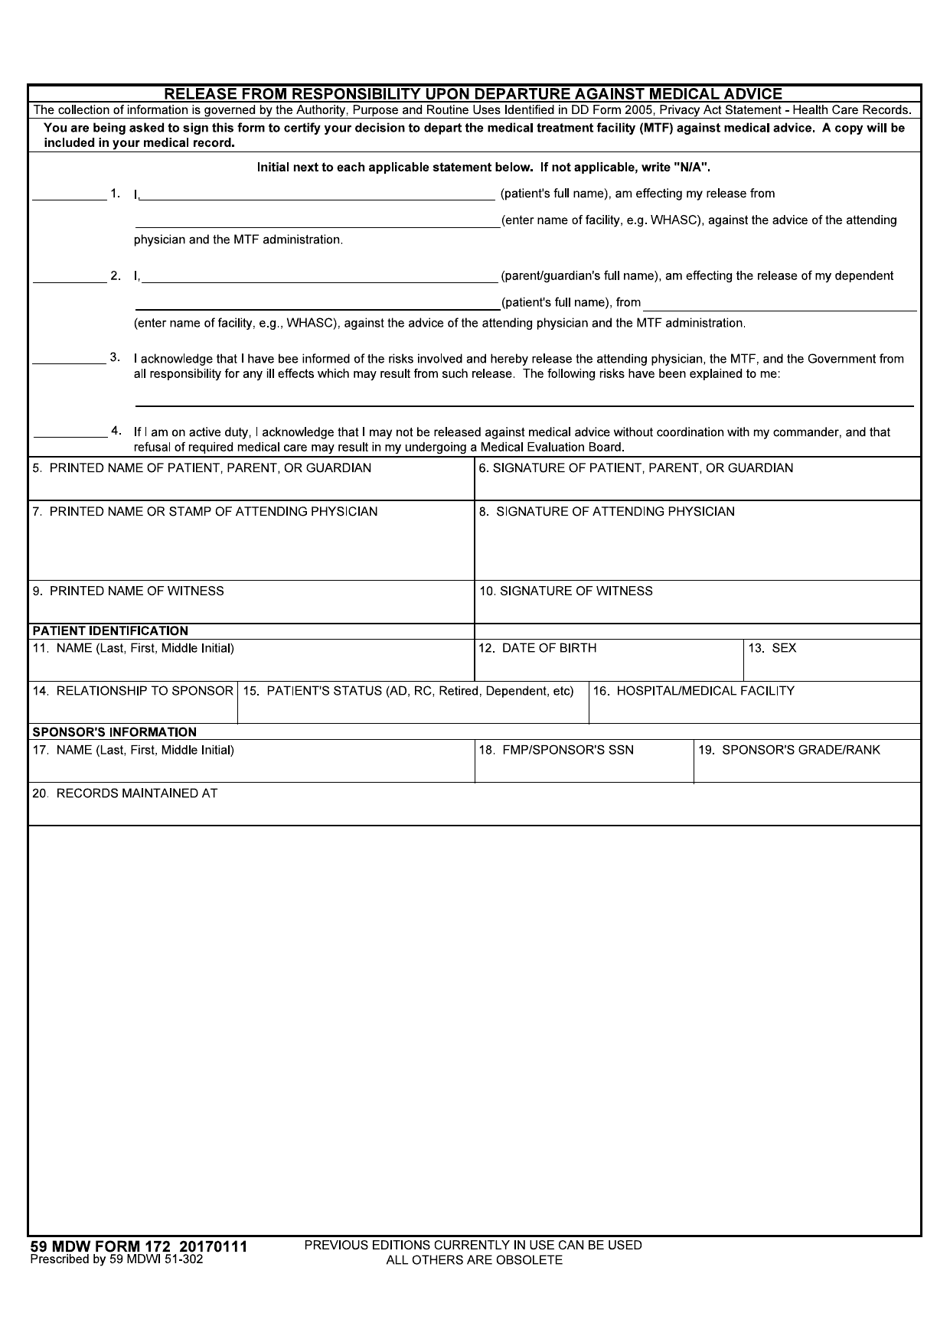 59 MDW Form 172 Release From Responsibility Upon Departure Against Medical Advice, Page 1